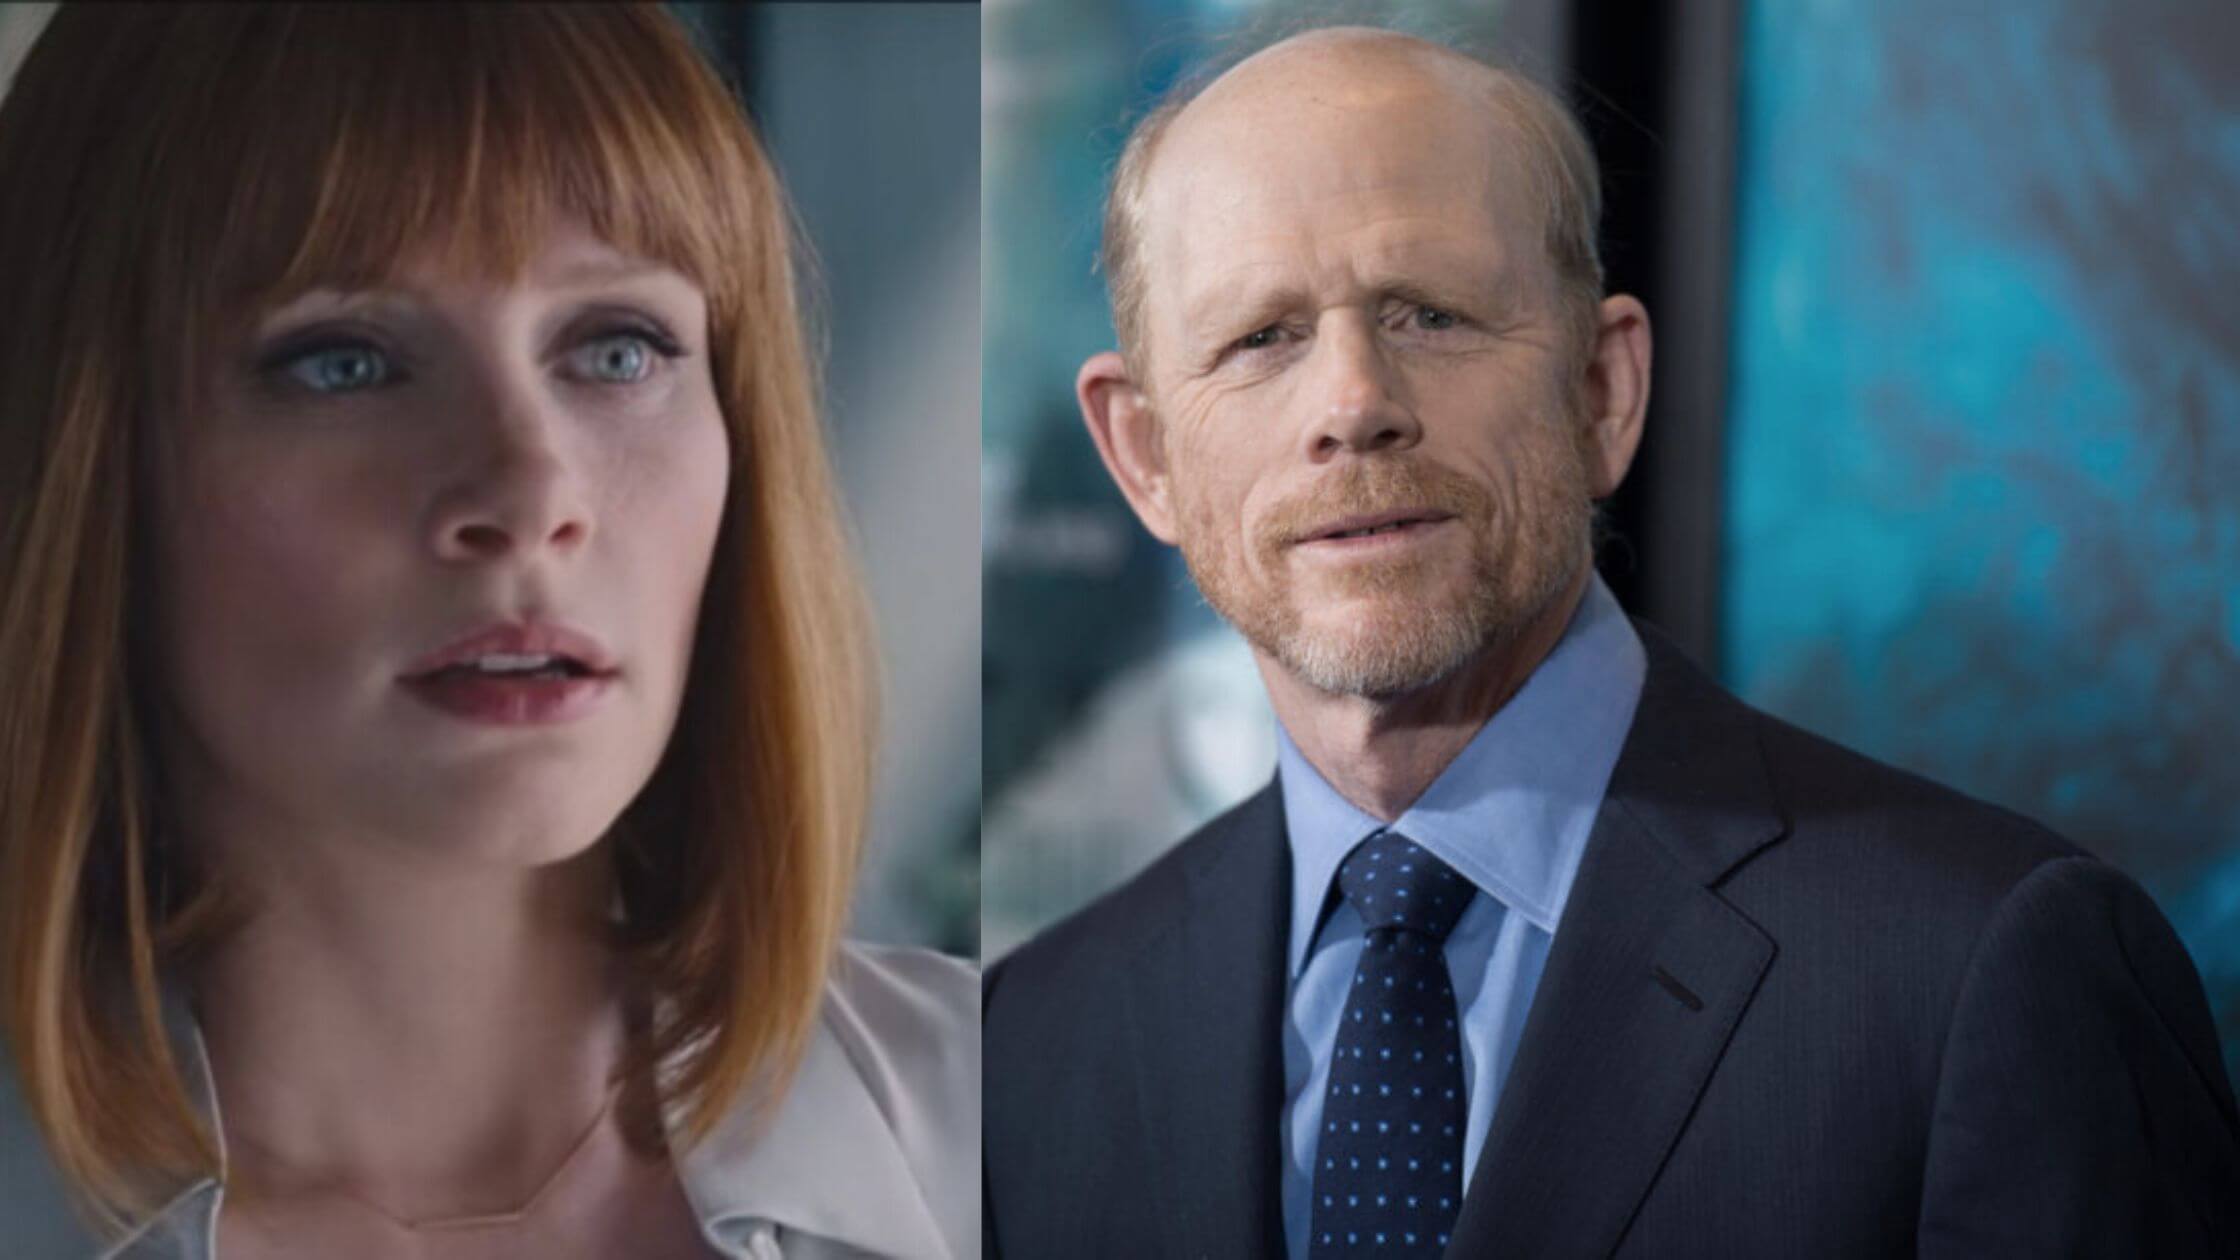 Ron Howard Responds To His Daughter's Achievement As The Mandalorian's Director